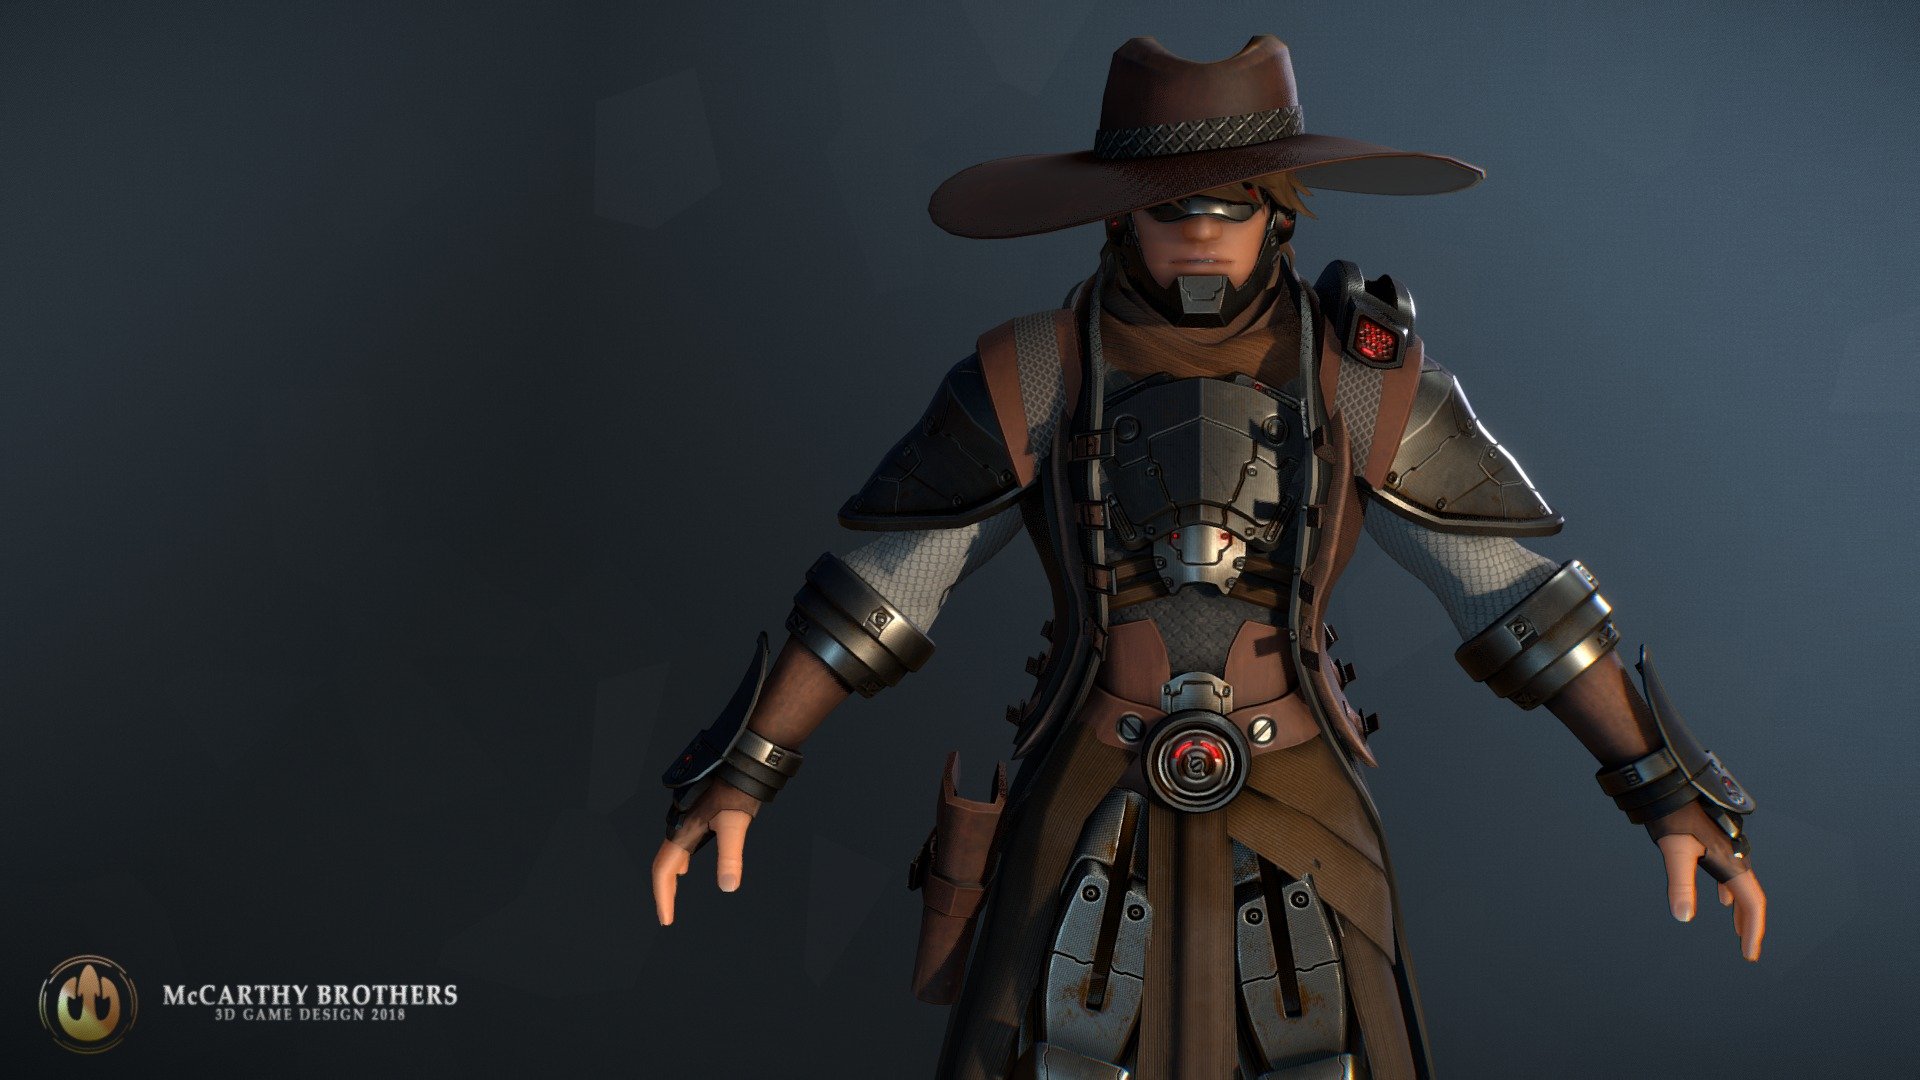 This is a sci-fi twist of wild western cowboys, it is inspired by characters like McCree from Overwatch. 

I made this to test my character modelling skills, as i havent done any in a while, and its slightly different from what I usually design.

Hope you all like it 3d model